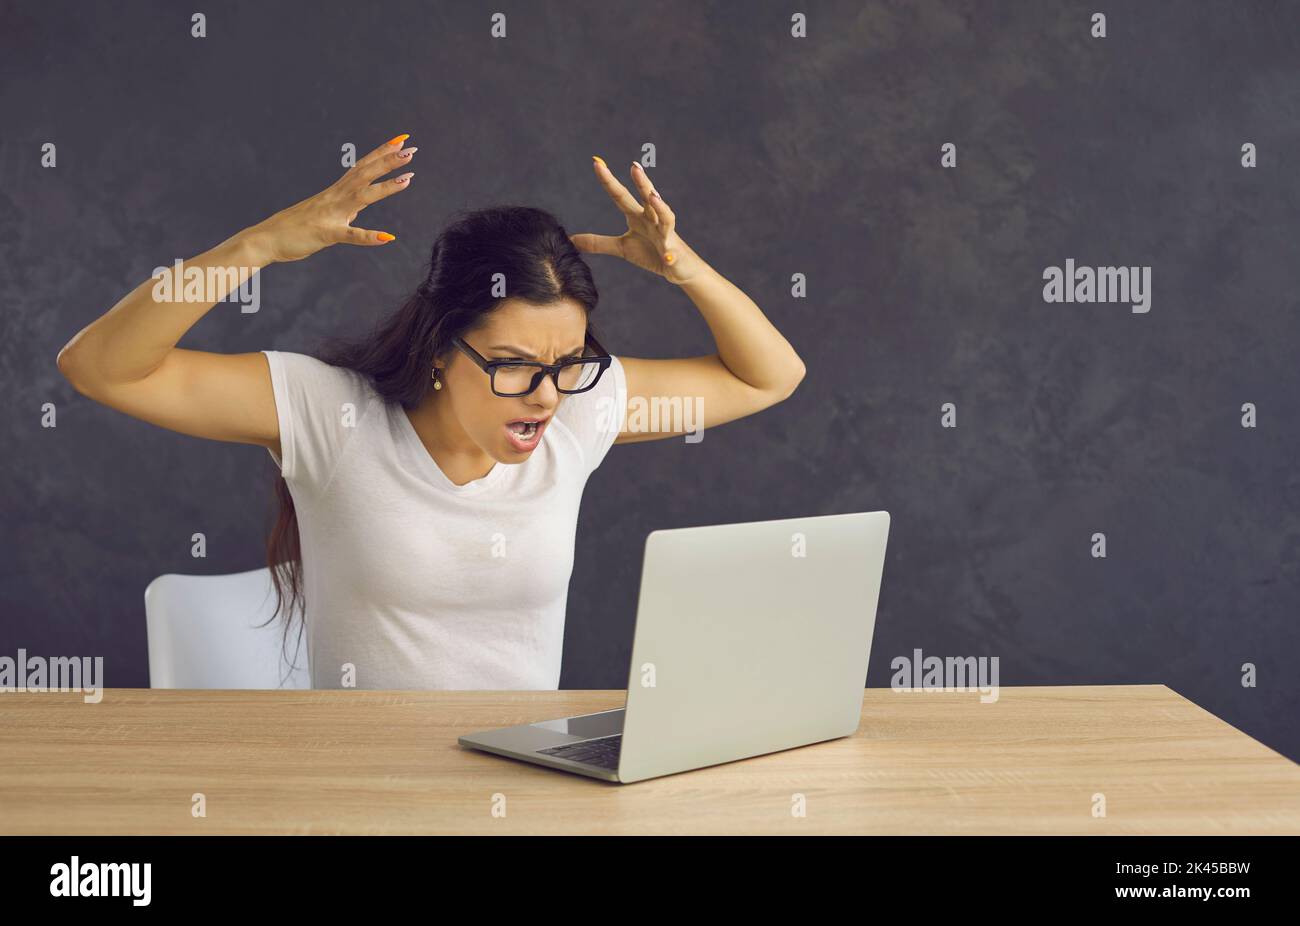 Angry and frustrated woman feels stressed and screams furiously while sitting in front of a laptop. Stock Photo